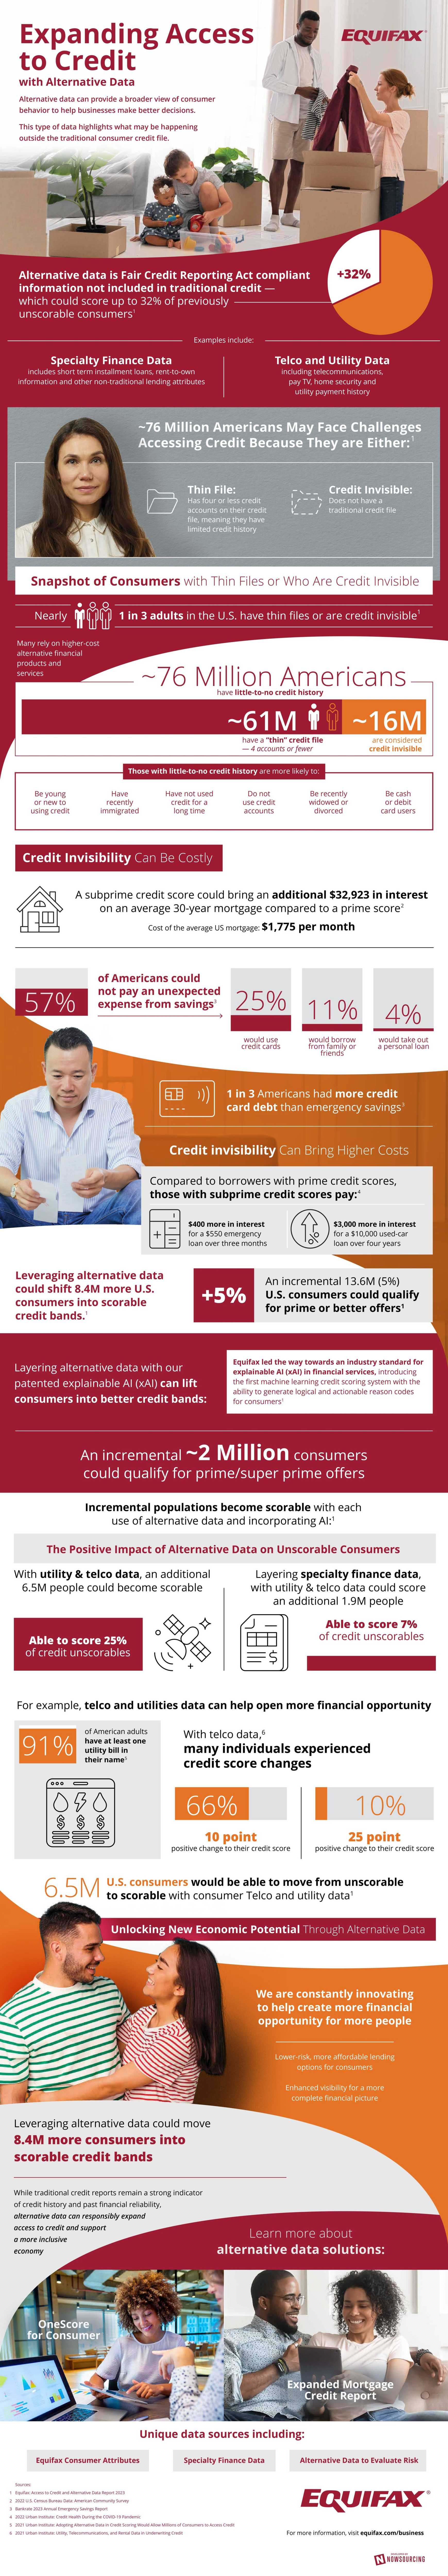 Expanding Access to Credit with Alternative Data